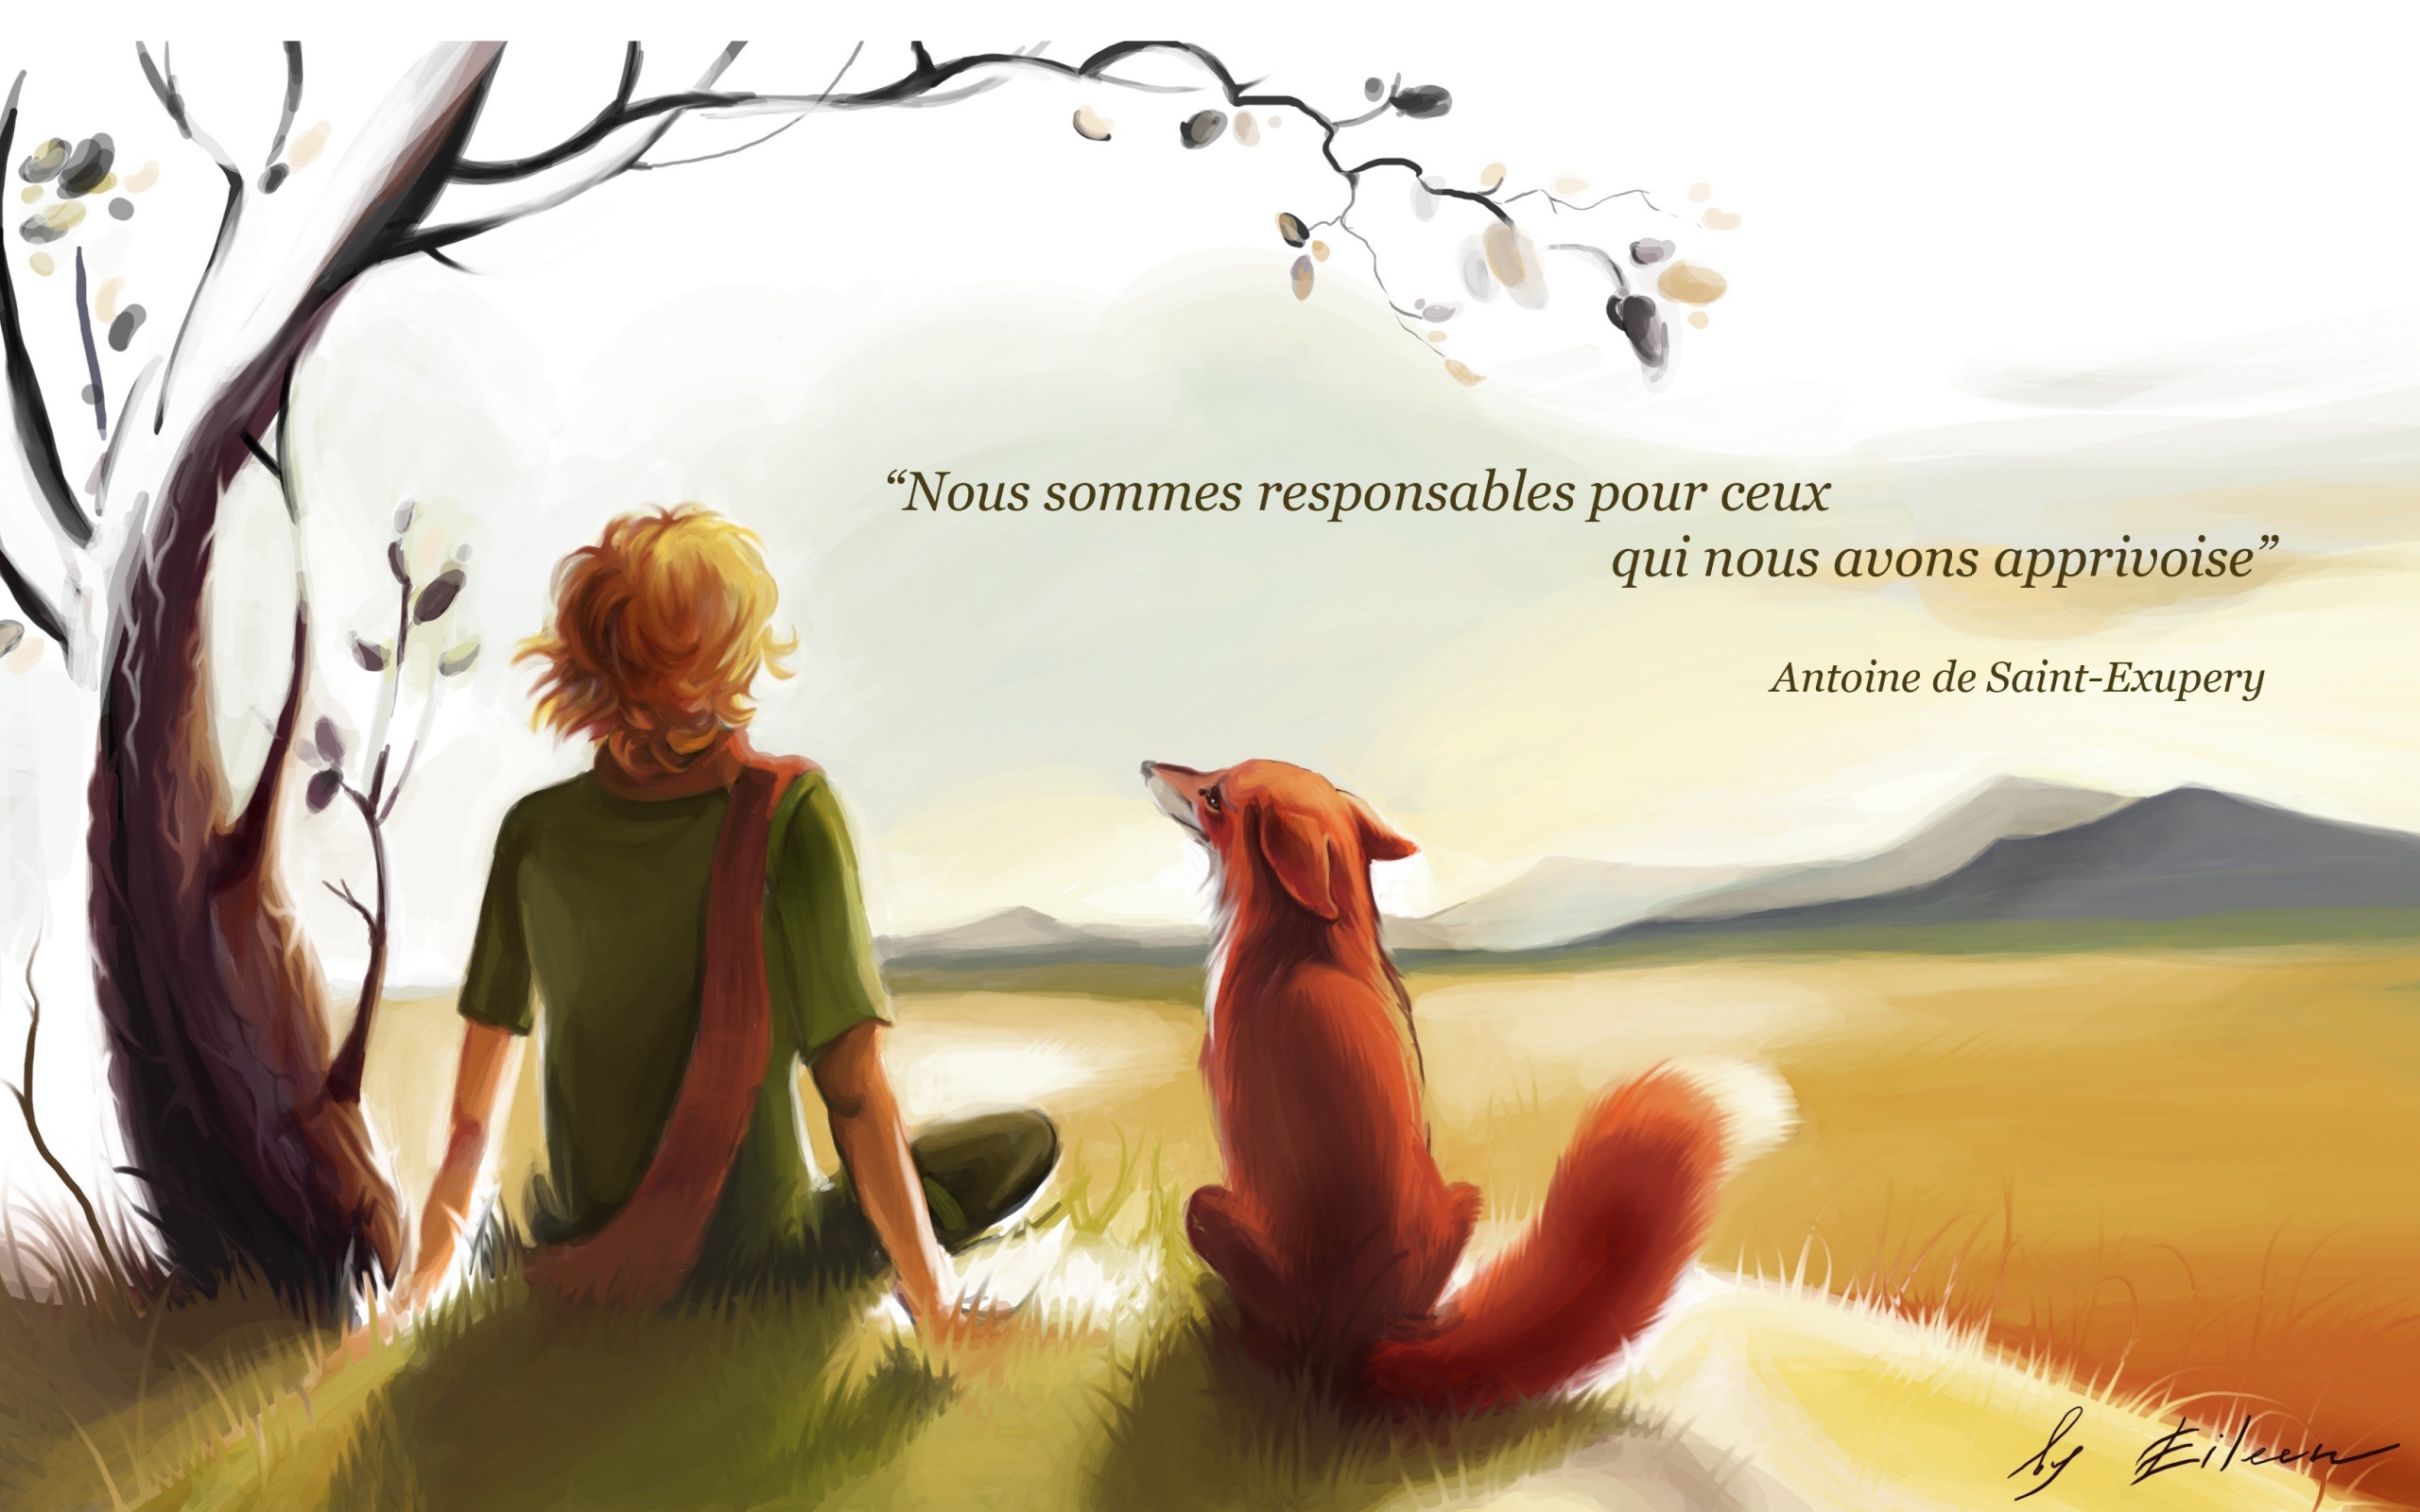 The Little Prince with fox story